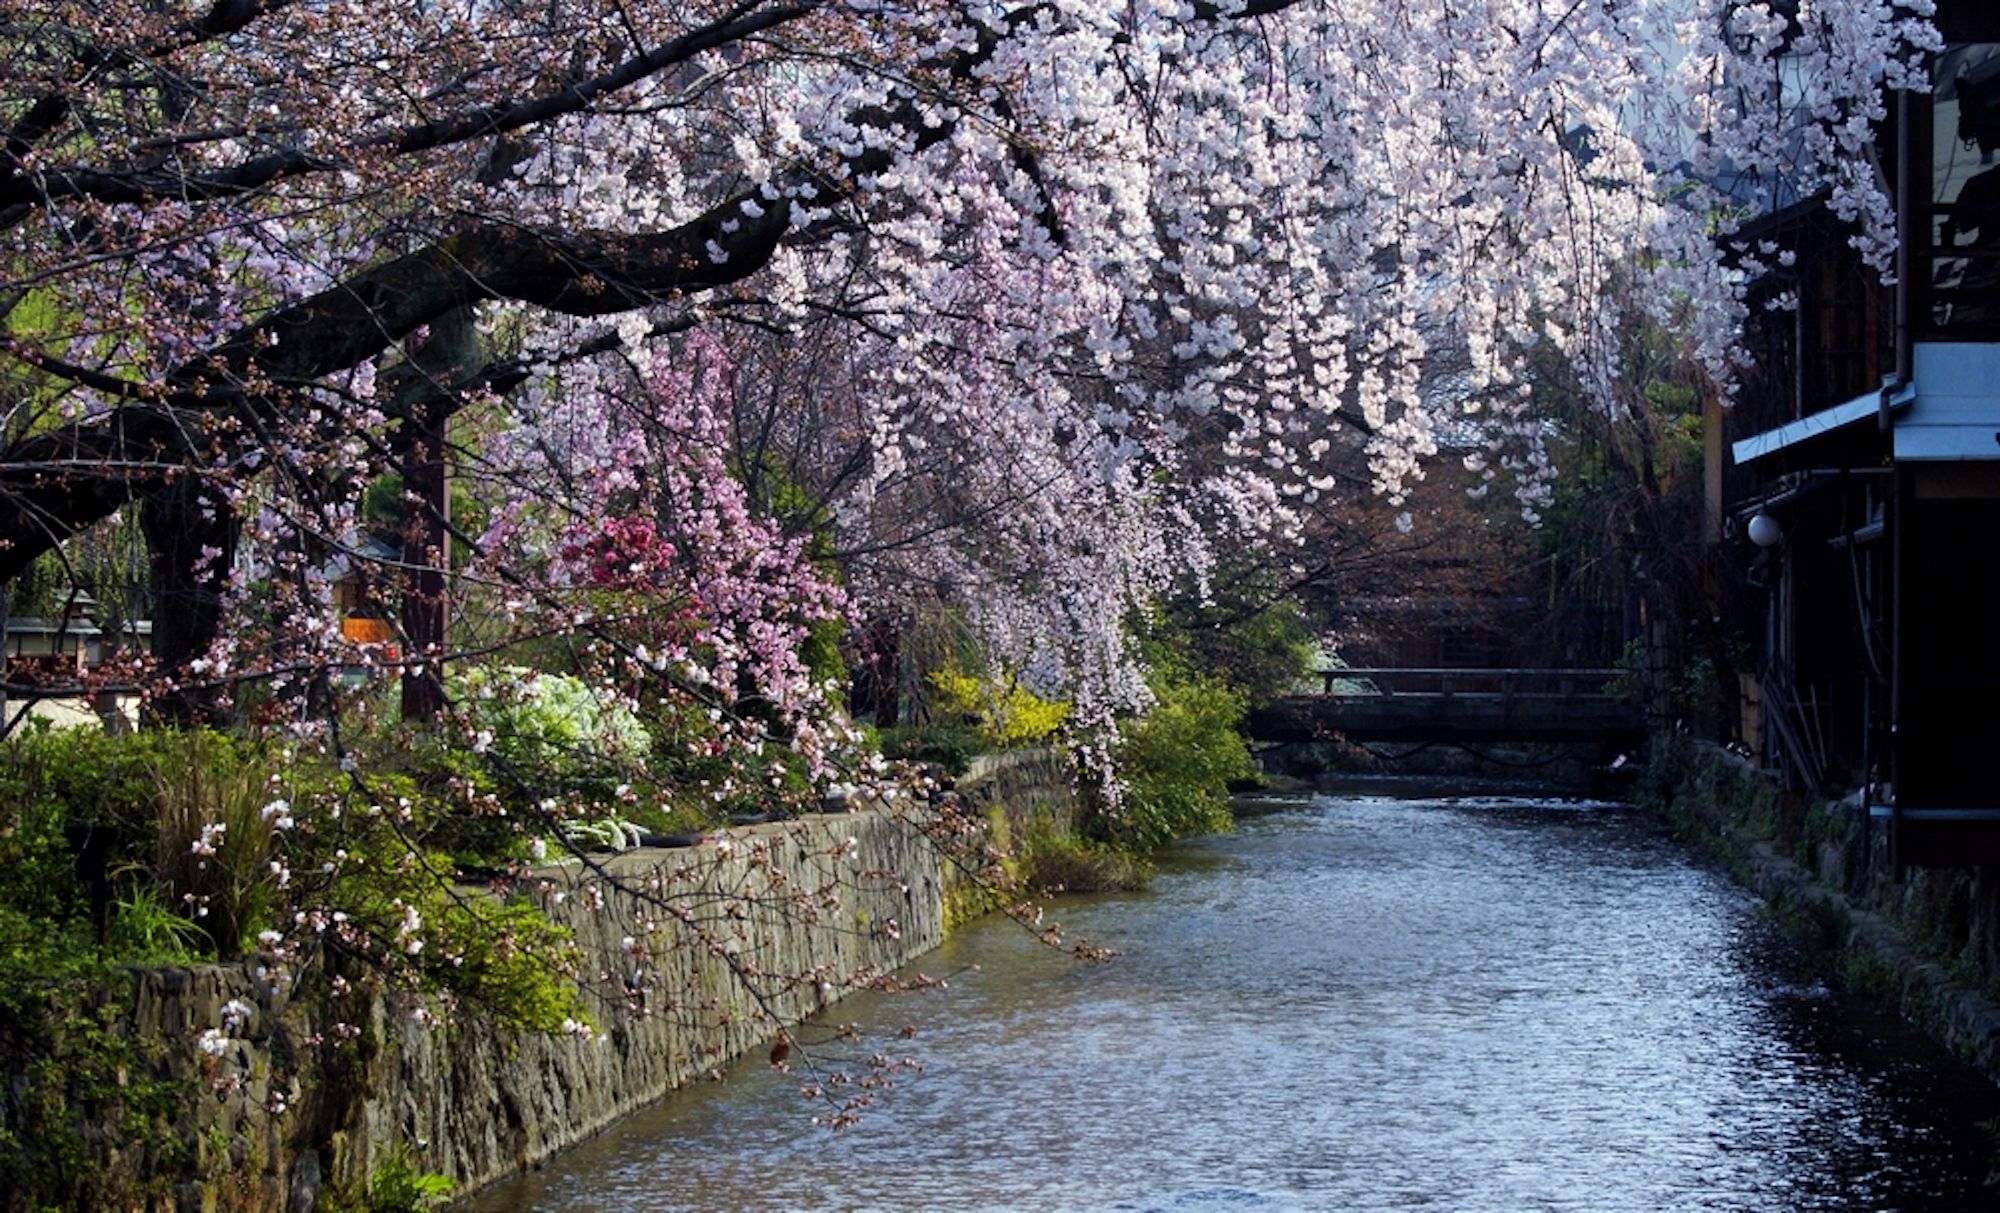 These 20 Weird Facts about Japanese Cherry Blossom Trees Will Make